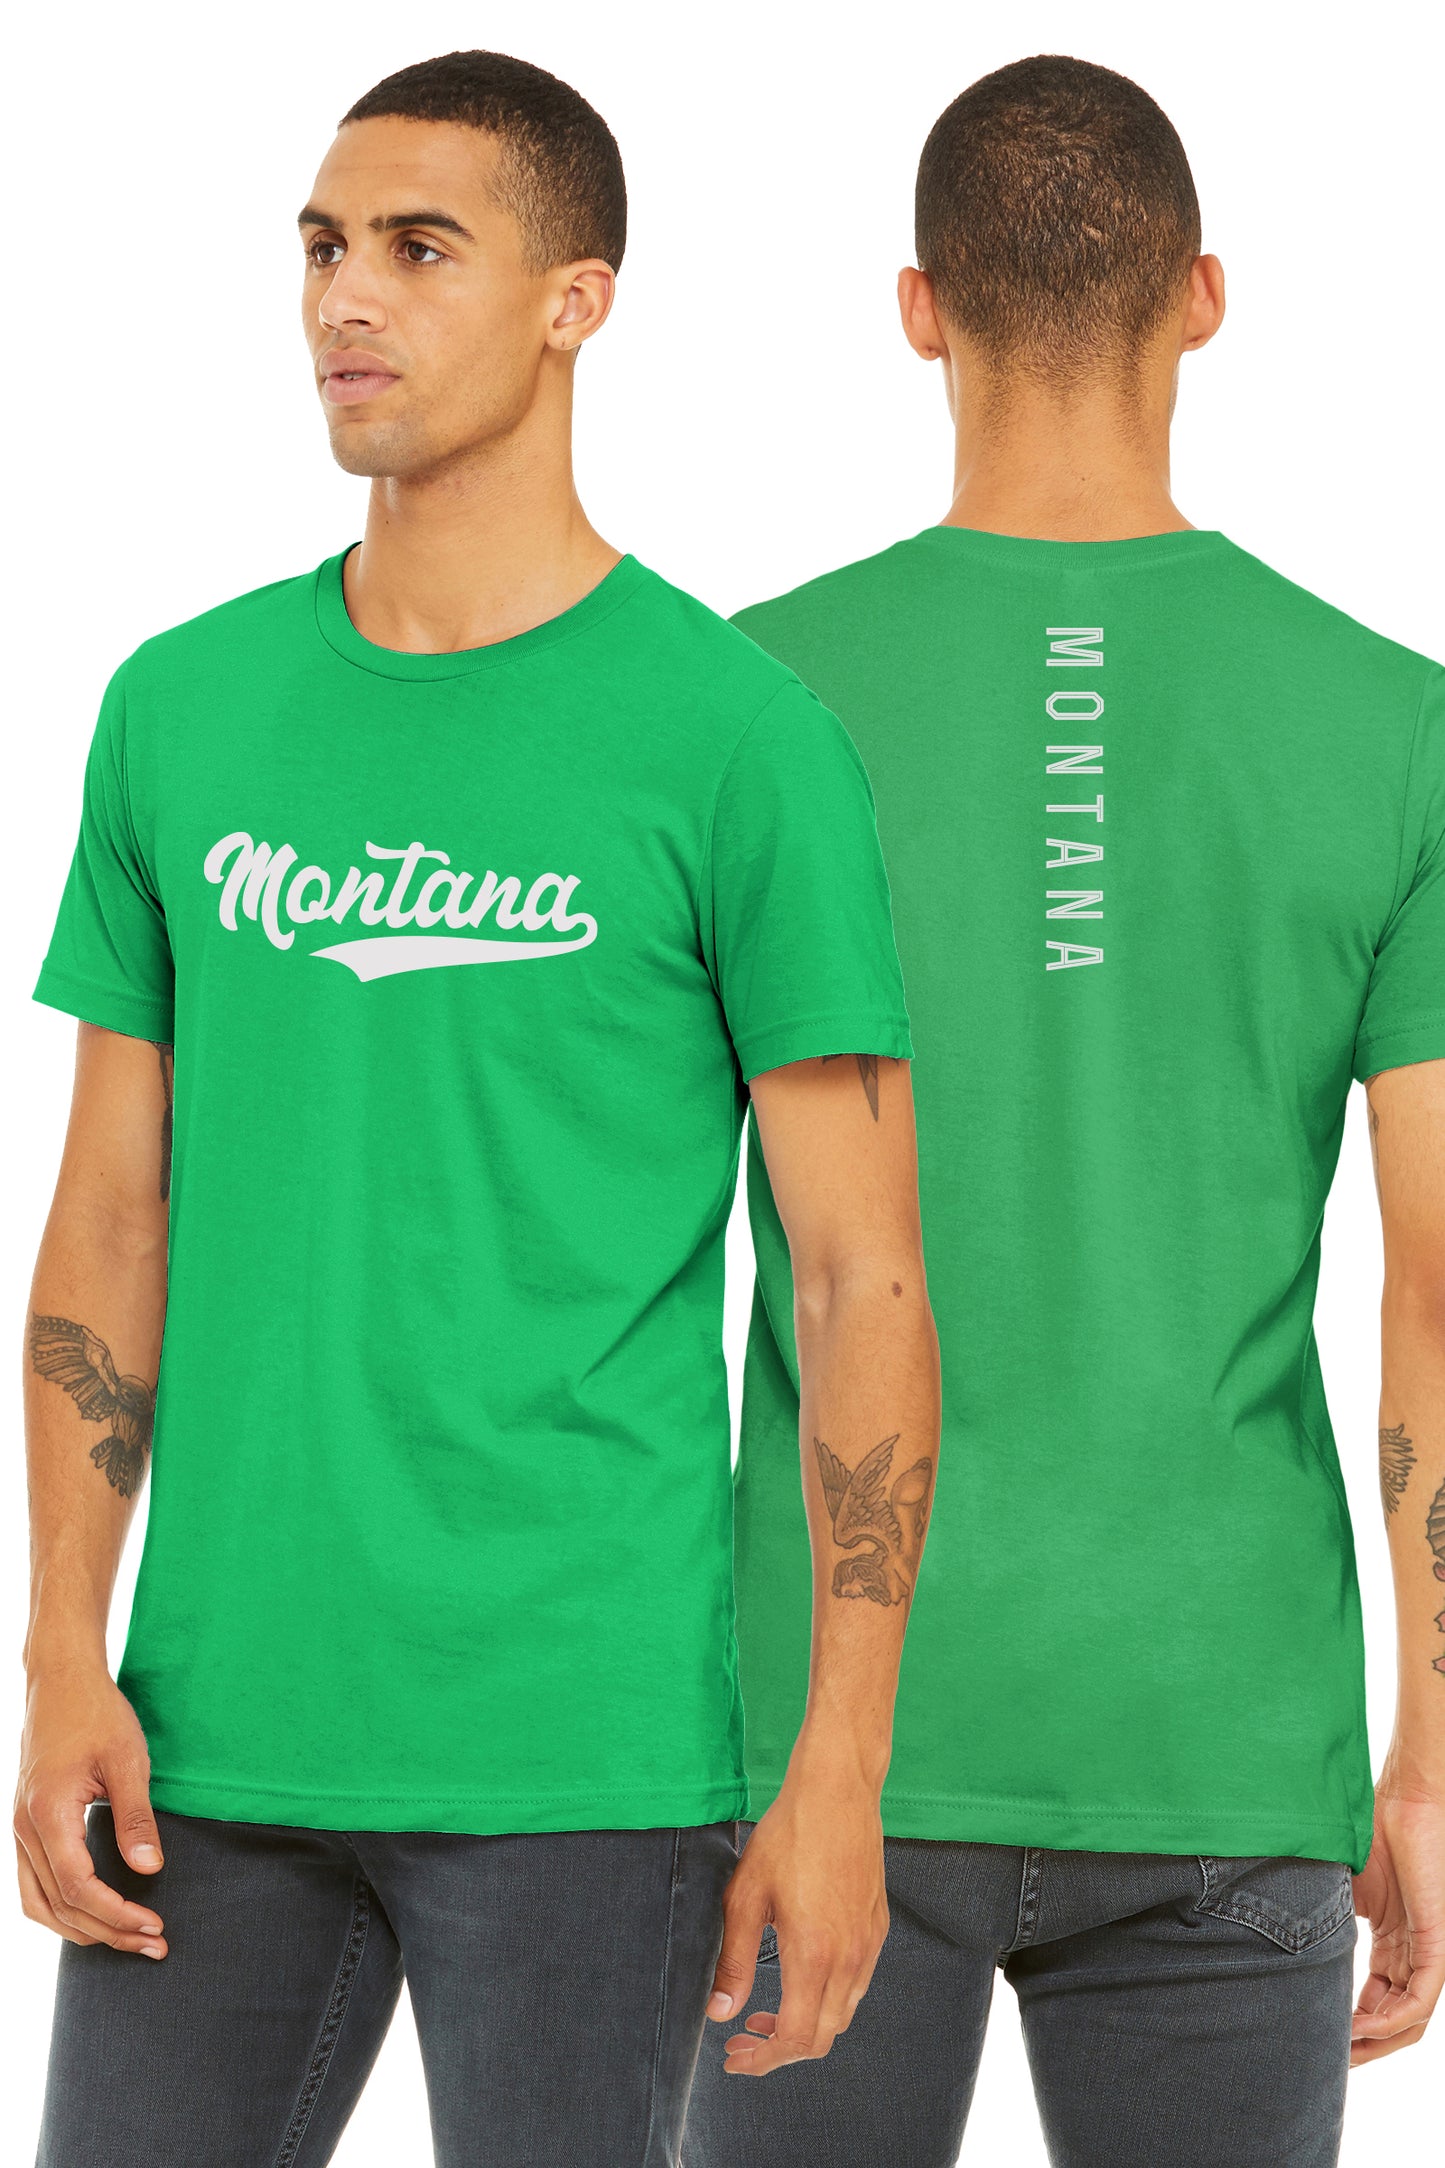 Daxton Adult Unisex Tshirt Montana Scrip with Vertical on the Back